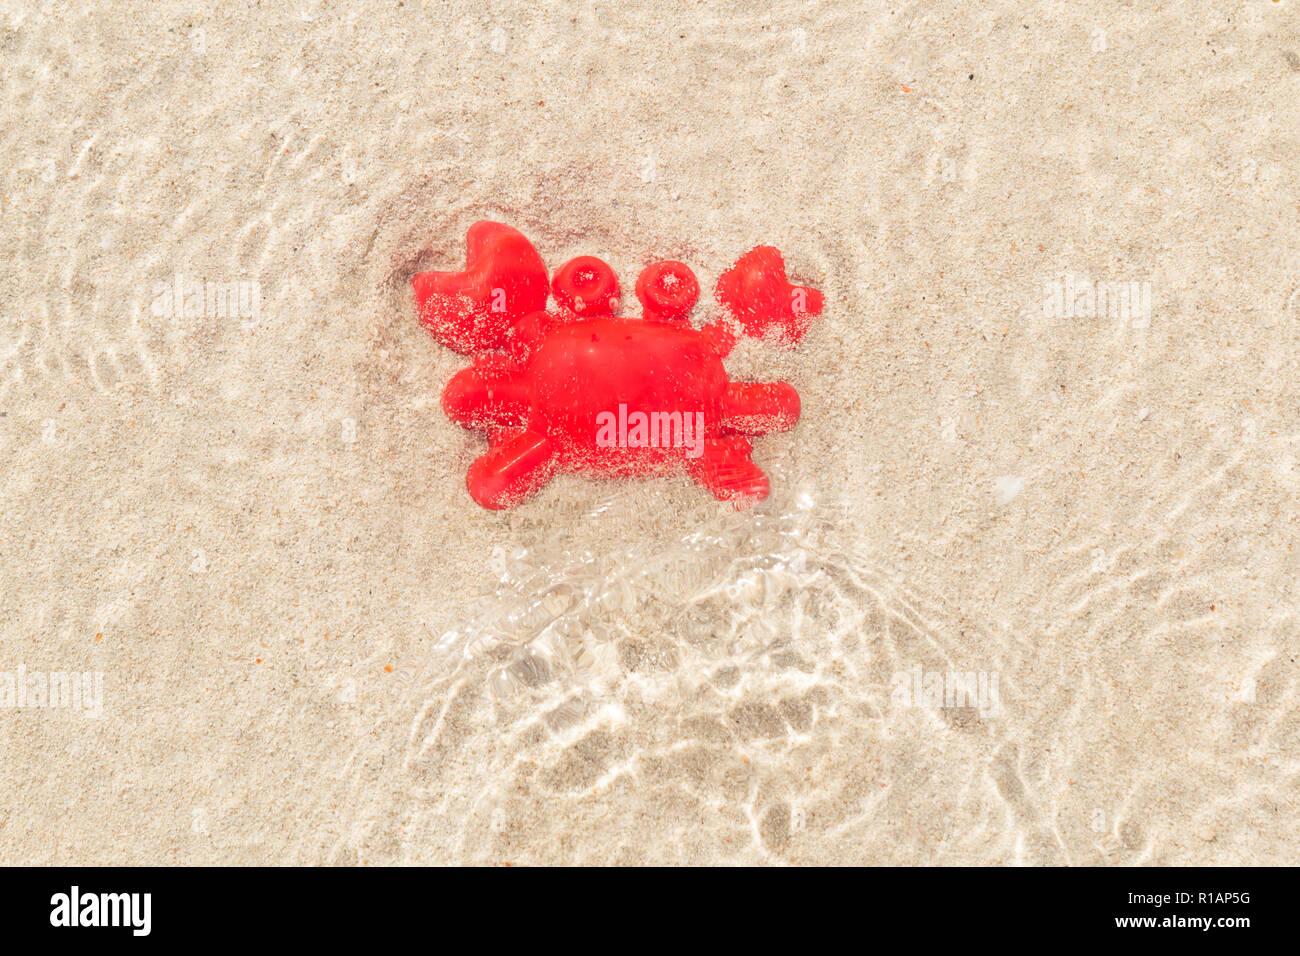 Toy red Hermit crab on sand under a shallow sea water with sunlight reflections on the surface of the water. Stock Photo